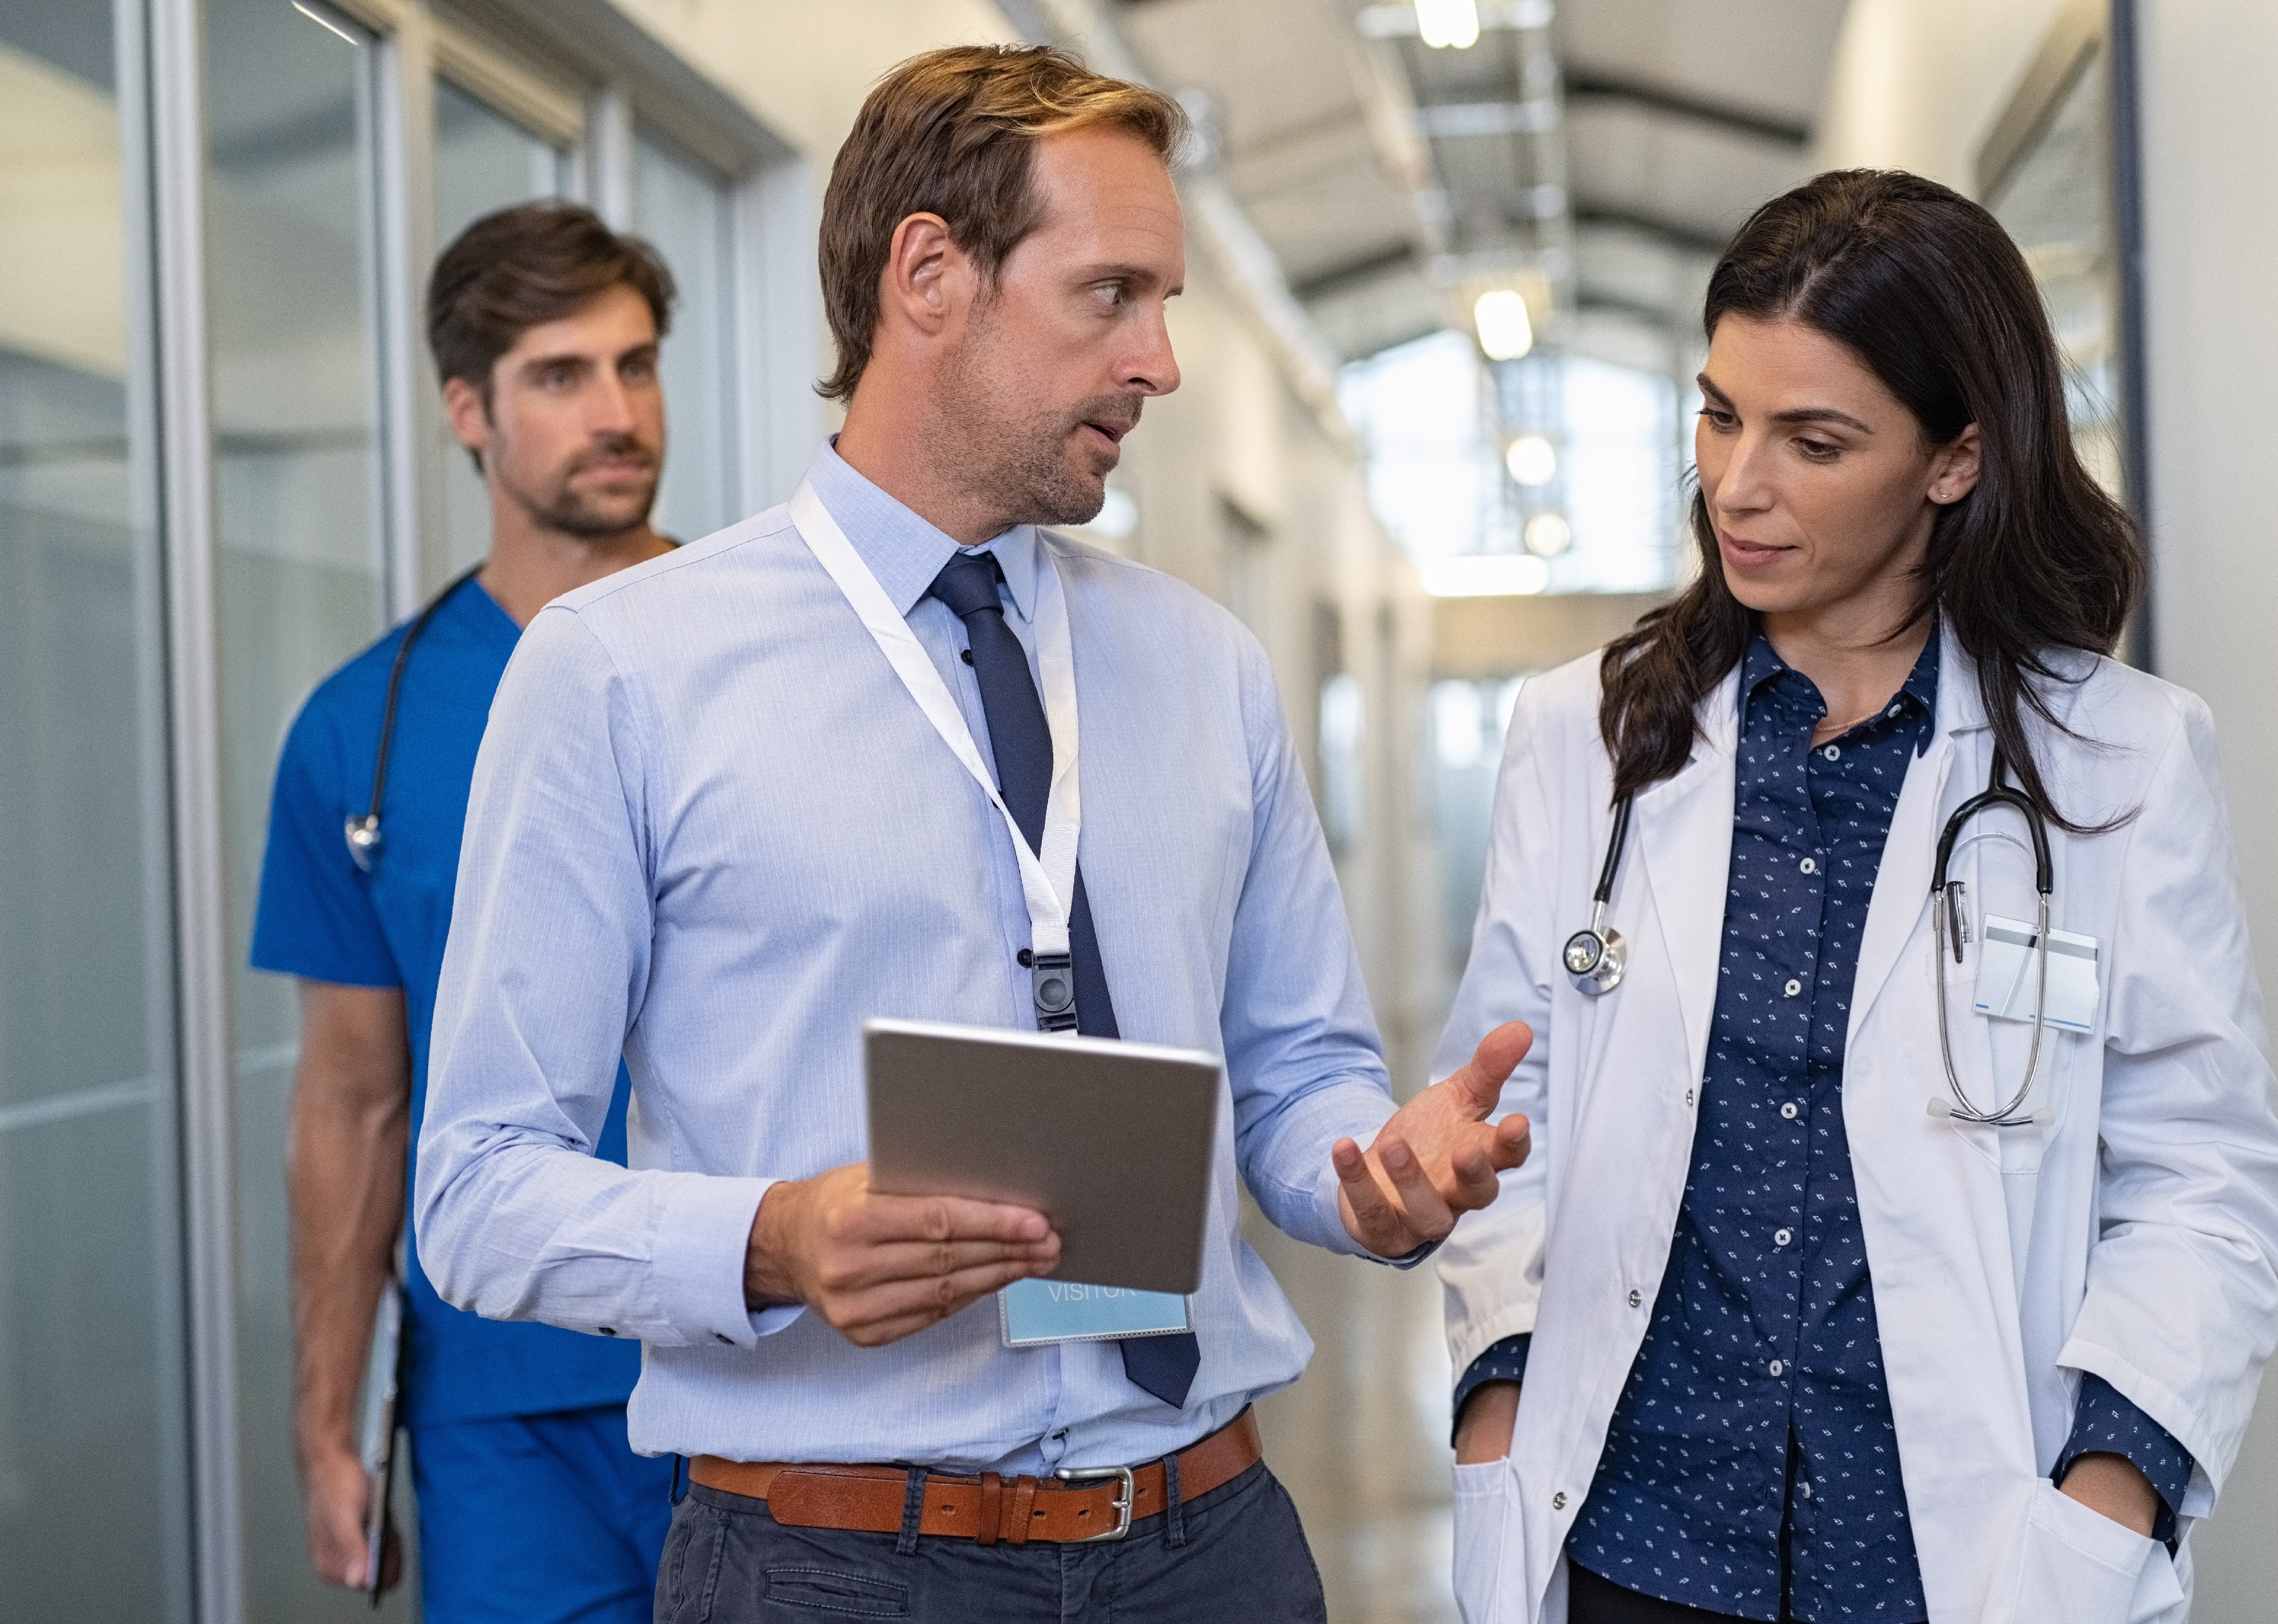 Male and female doctor having a discussion in hospital hallway.